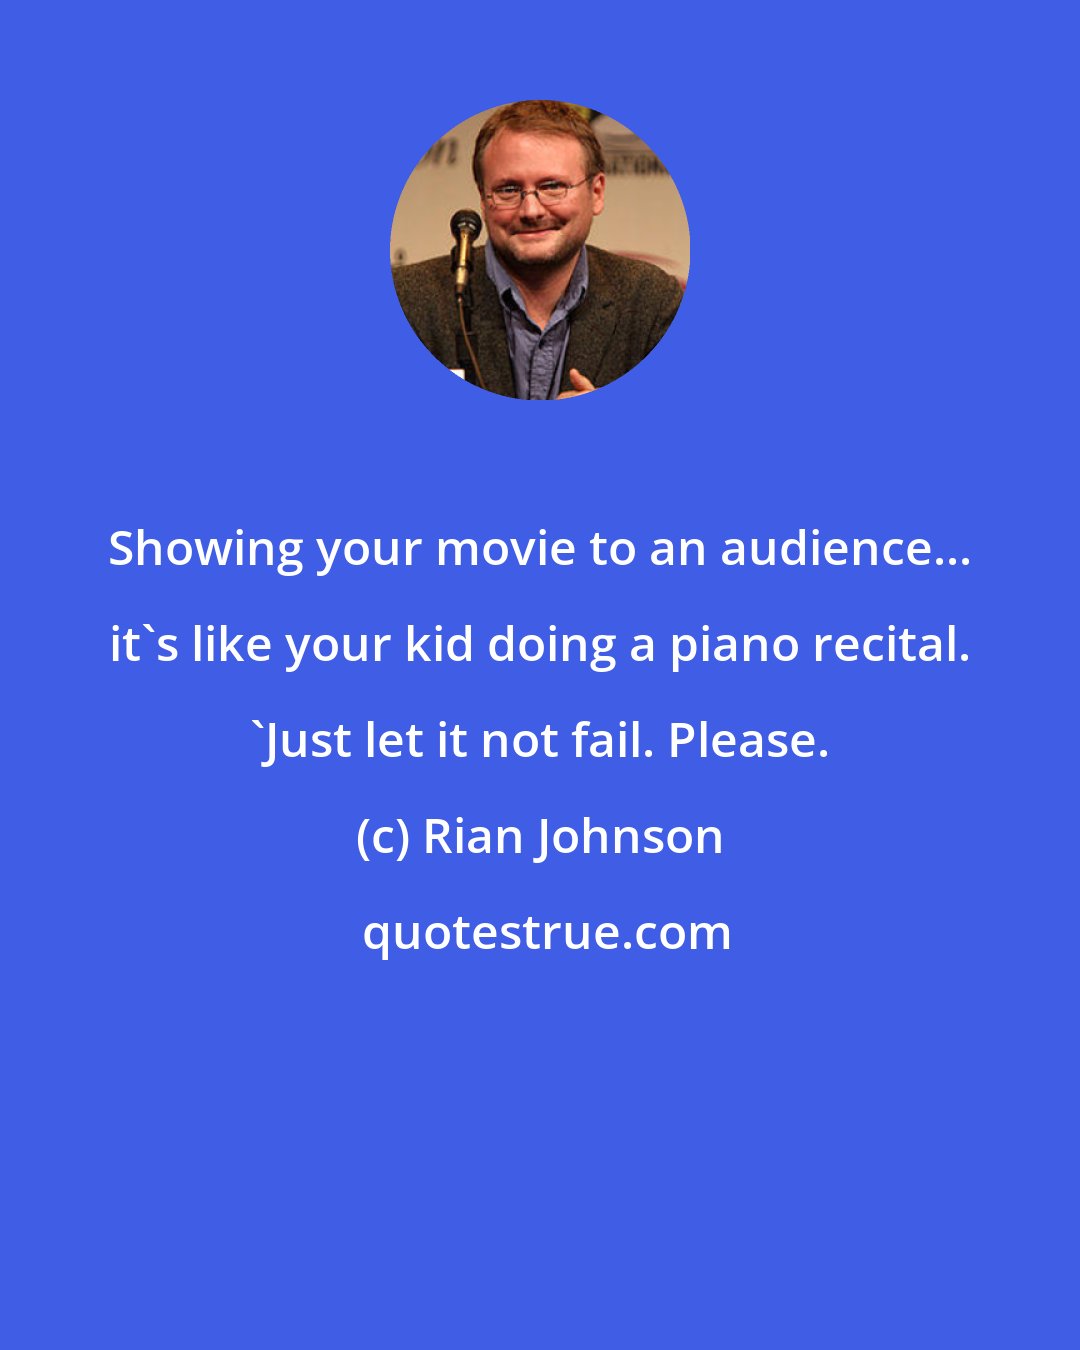 Rian Johnson: Showing your movie to an audience... it's like your kid doing a piano recital. 'Just let it not fail. Please.